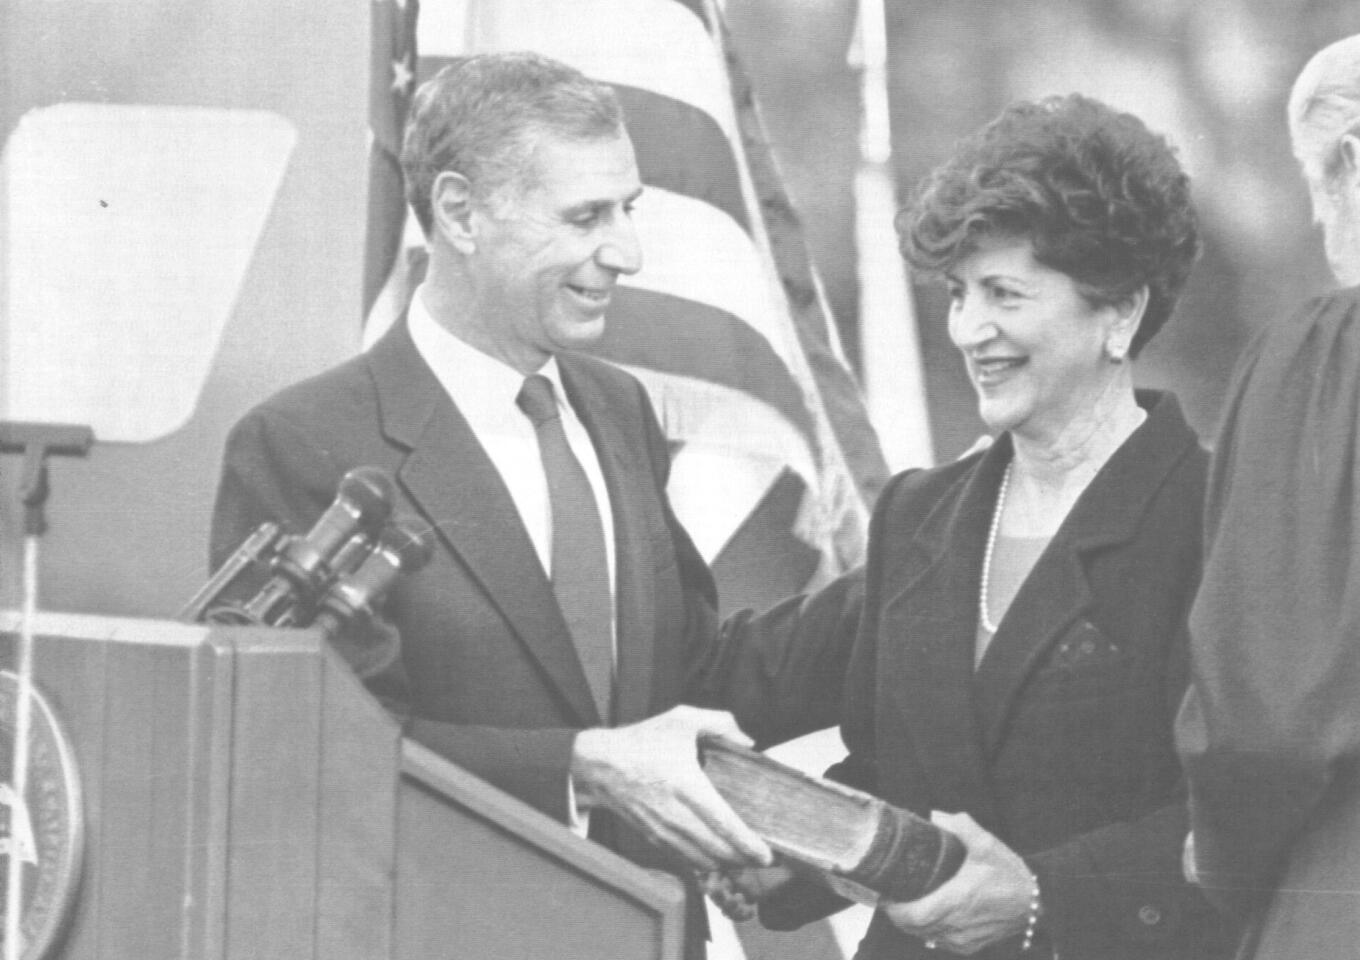 At his inauguration ceremony, Gov. Deukmajian and his wife, Gloria, hold a 486-year-old French Bible on which he took the oath of office.